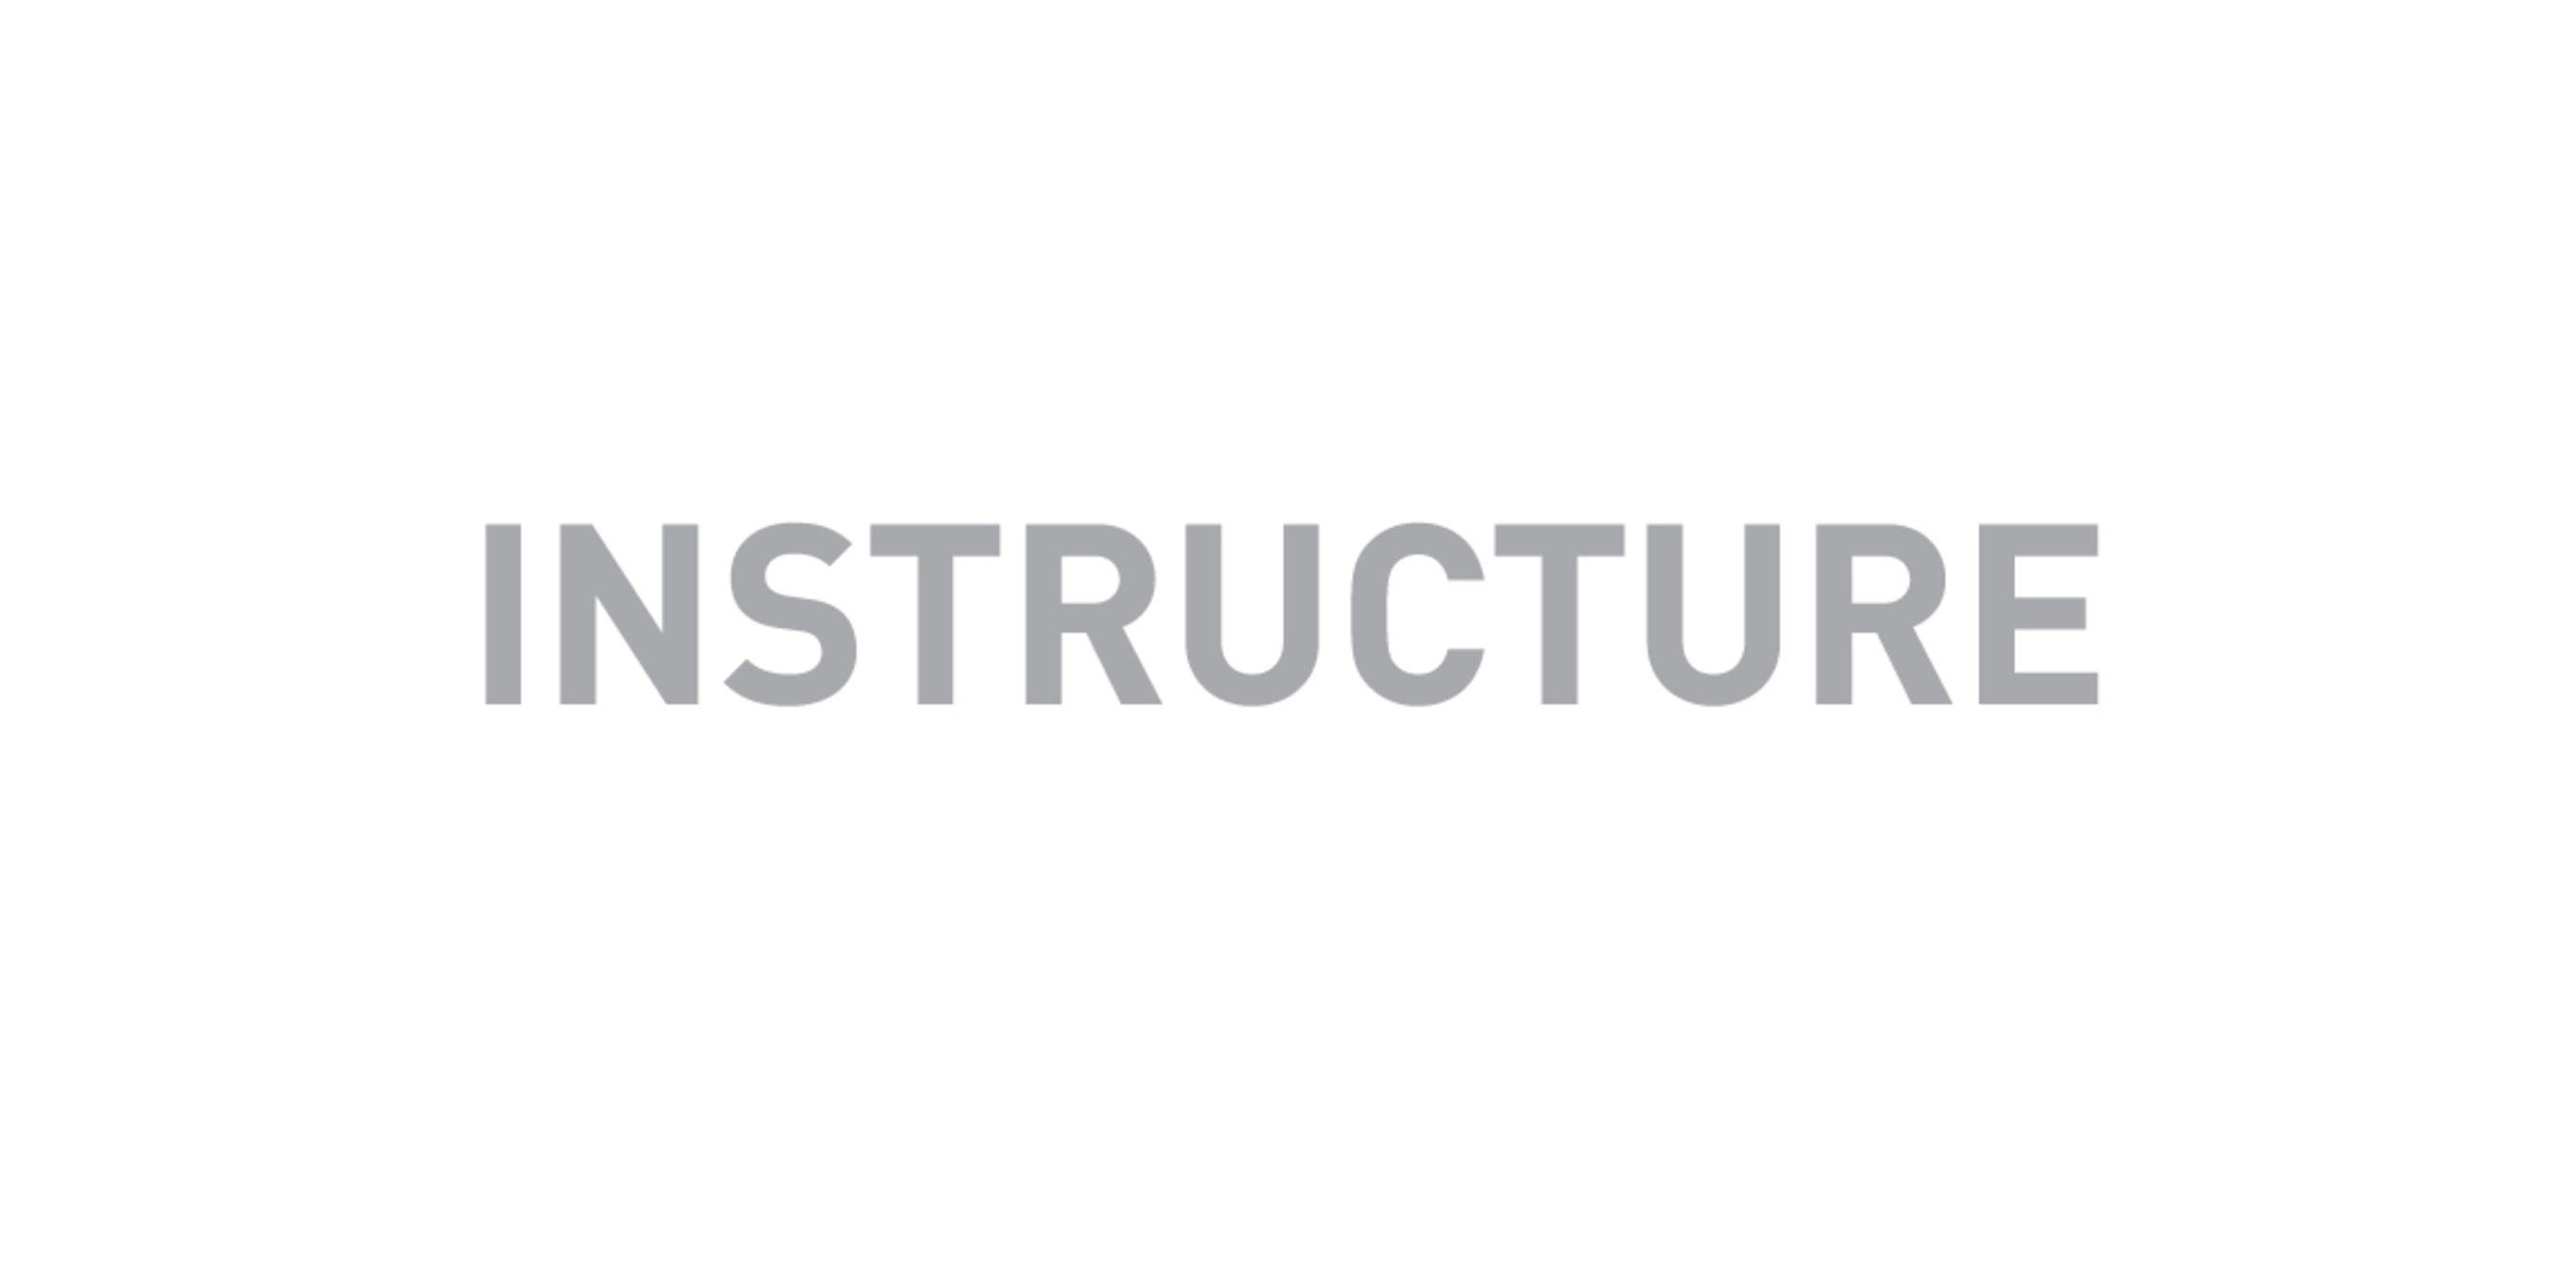 Instructure official logo